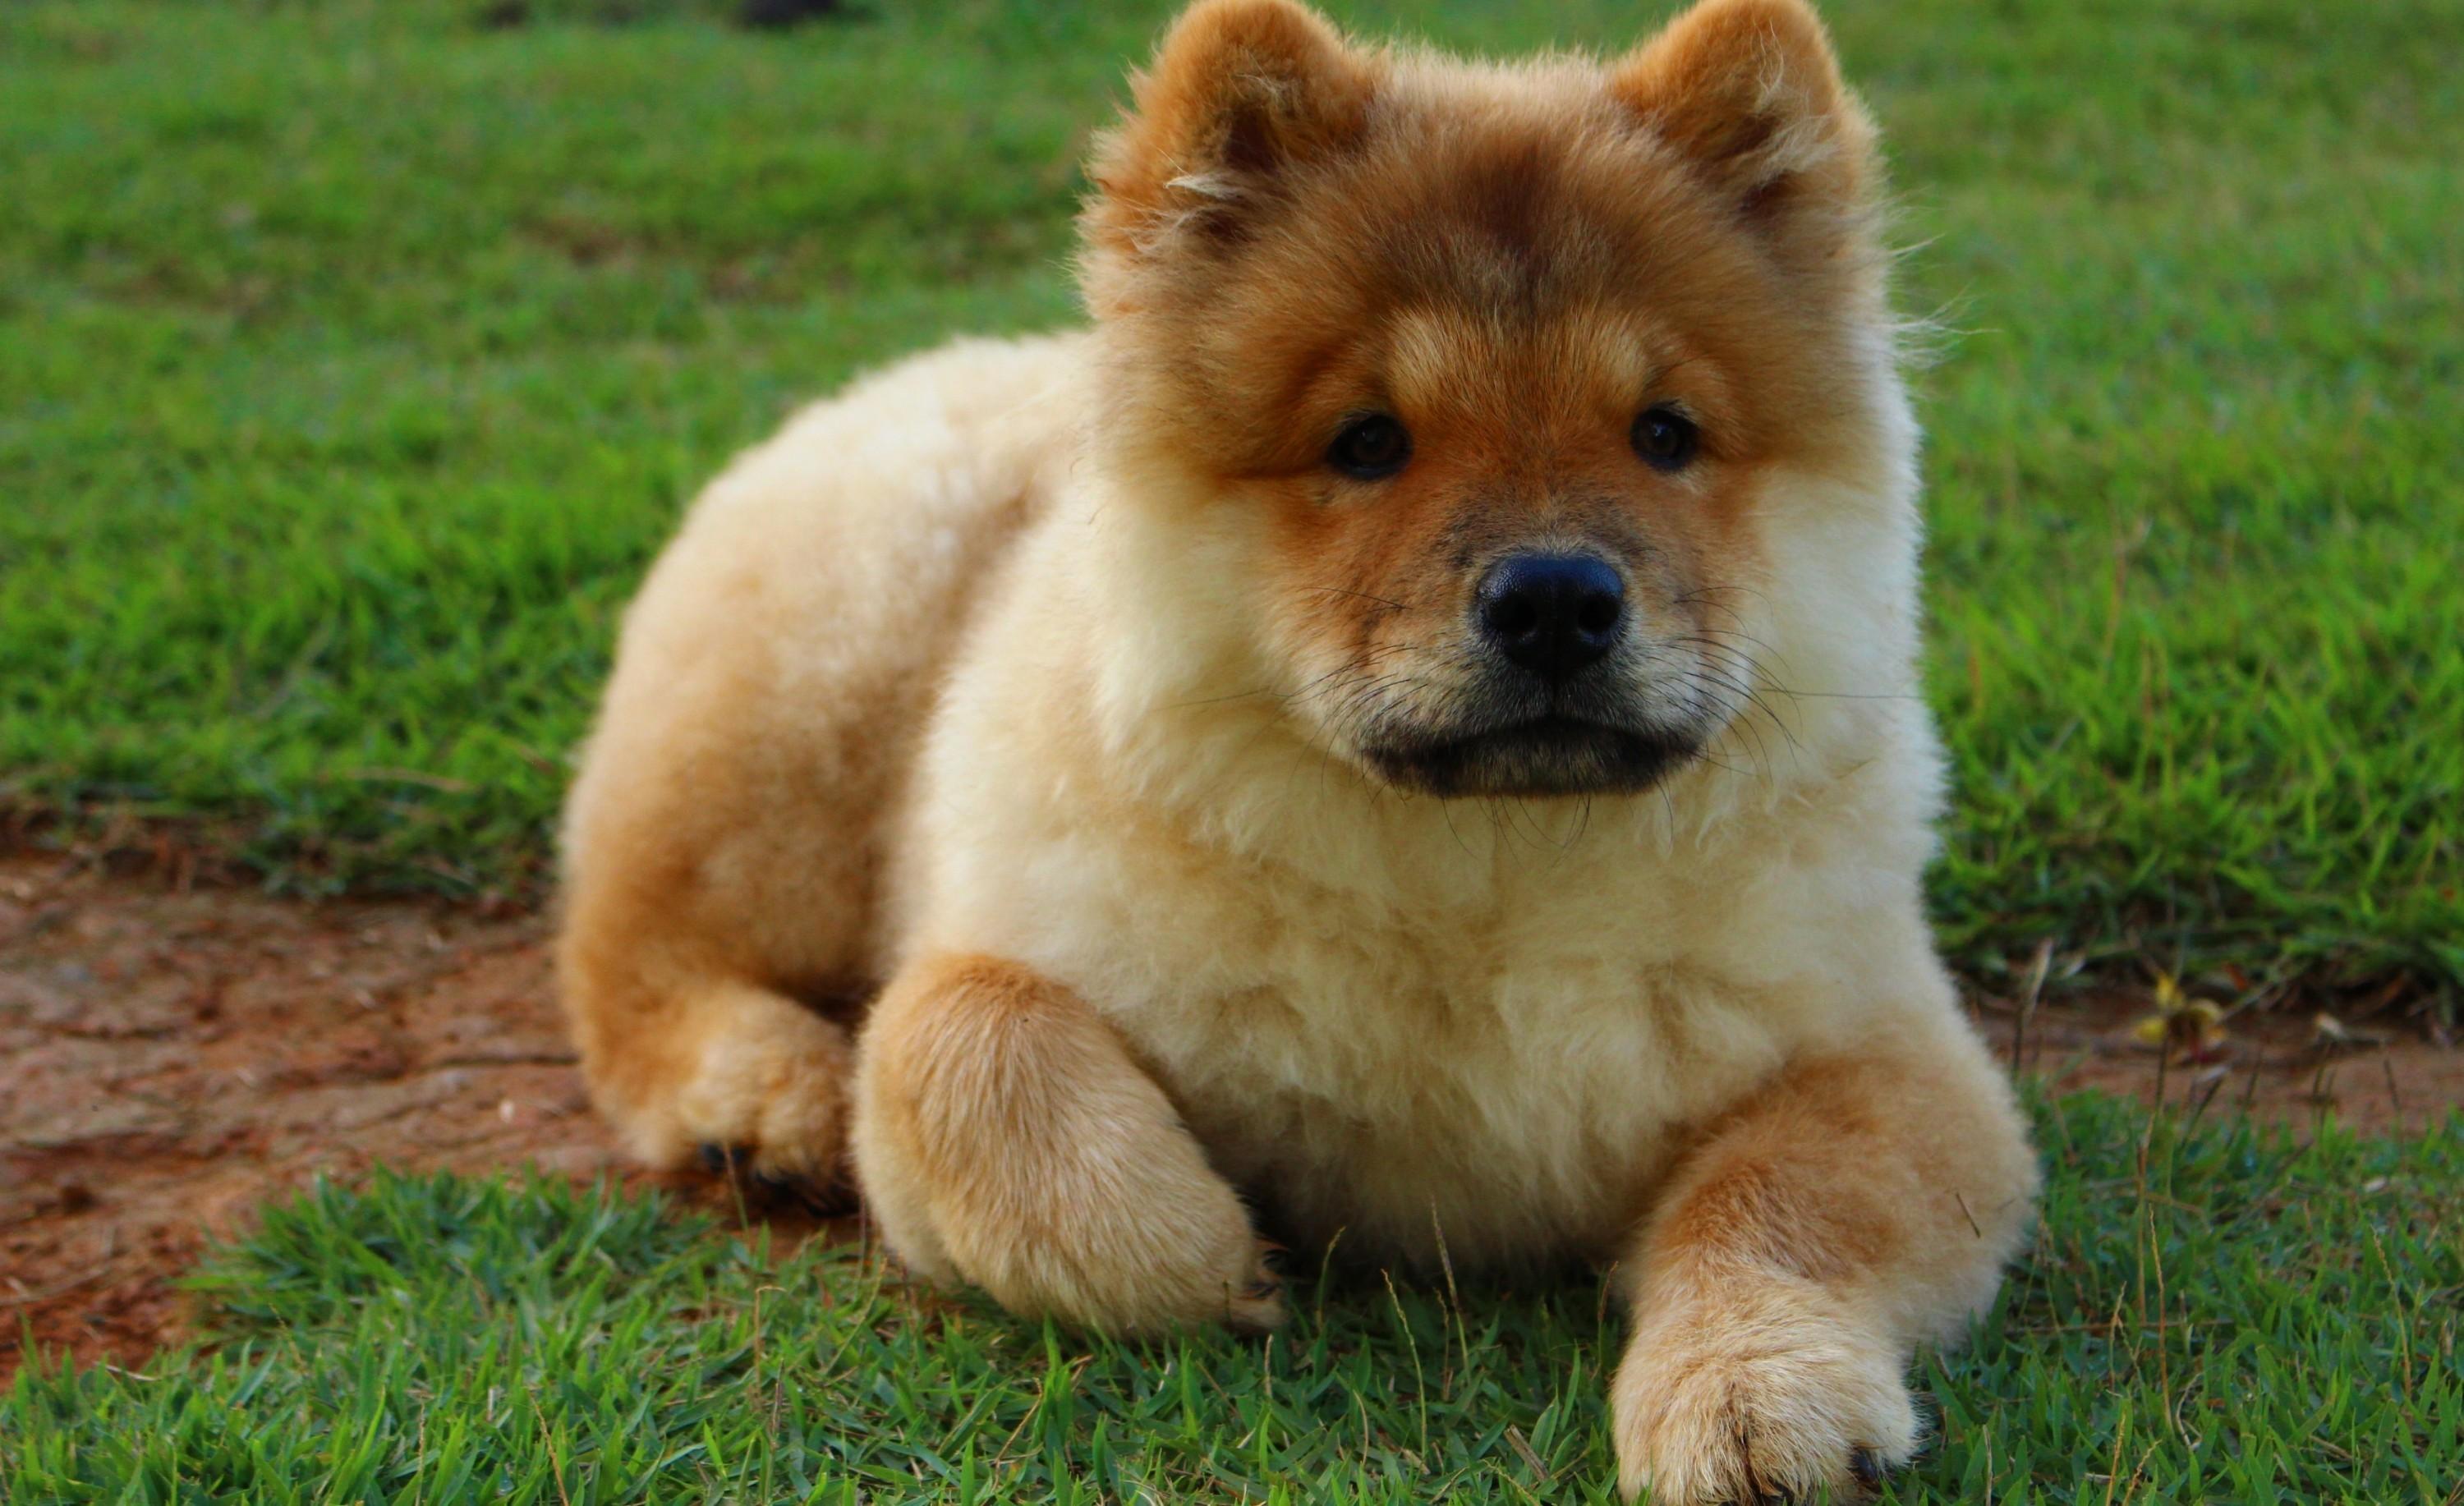 Download 3000x1834 Puppy, Sitting, Grass, Chow Chow, Fluffy, Dogs